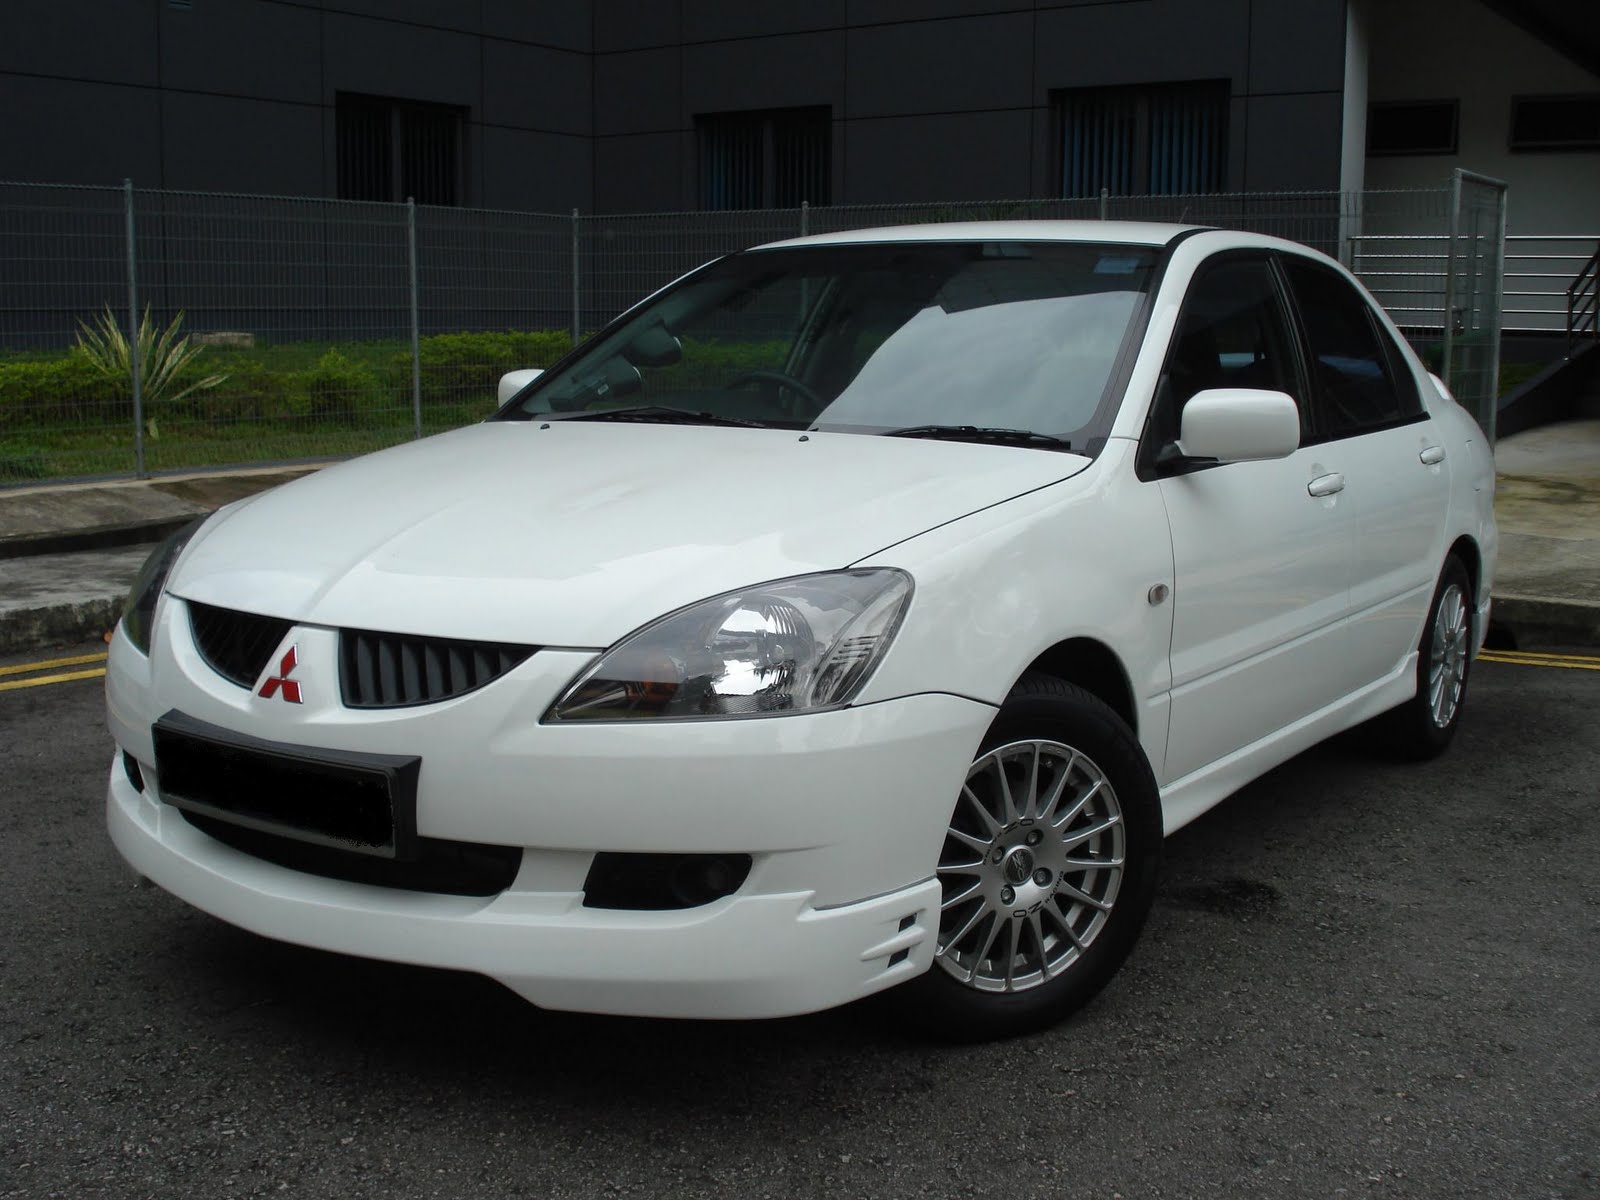 Specialize in Used Cars & Car Insurance Mitsubishi Lancer